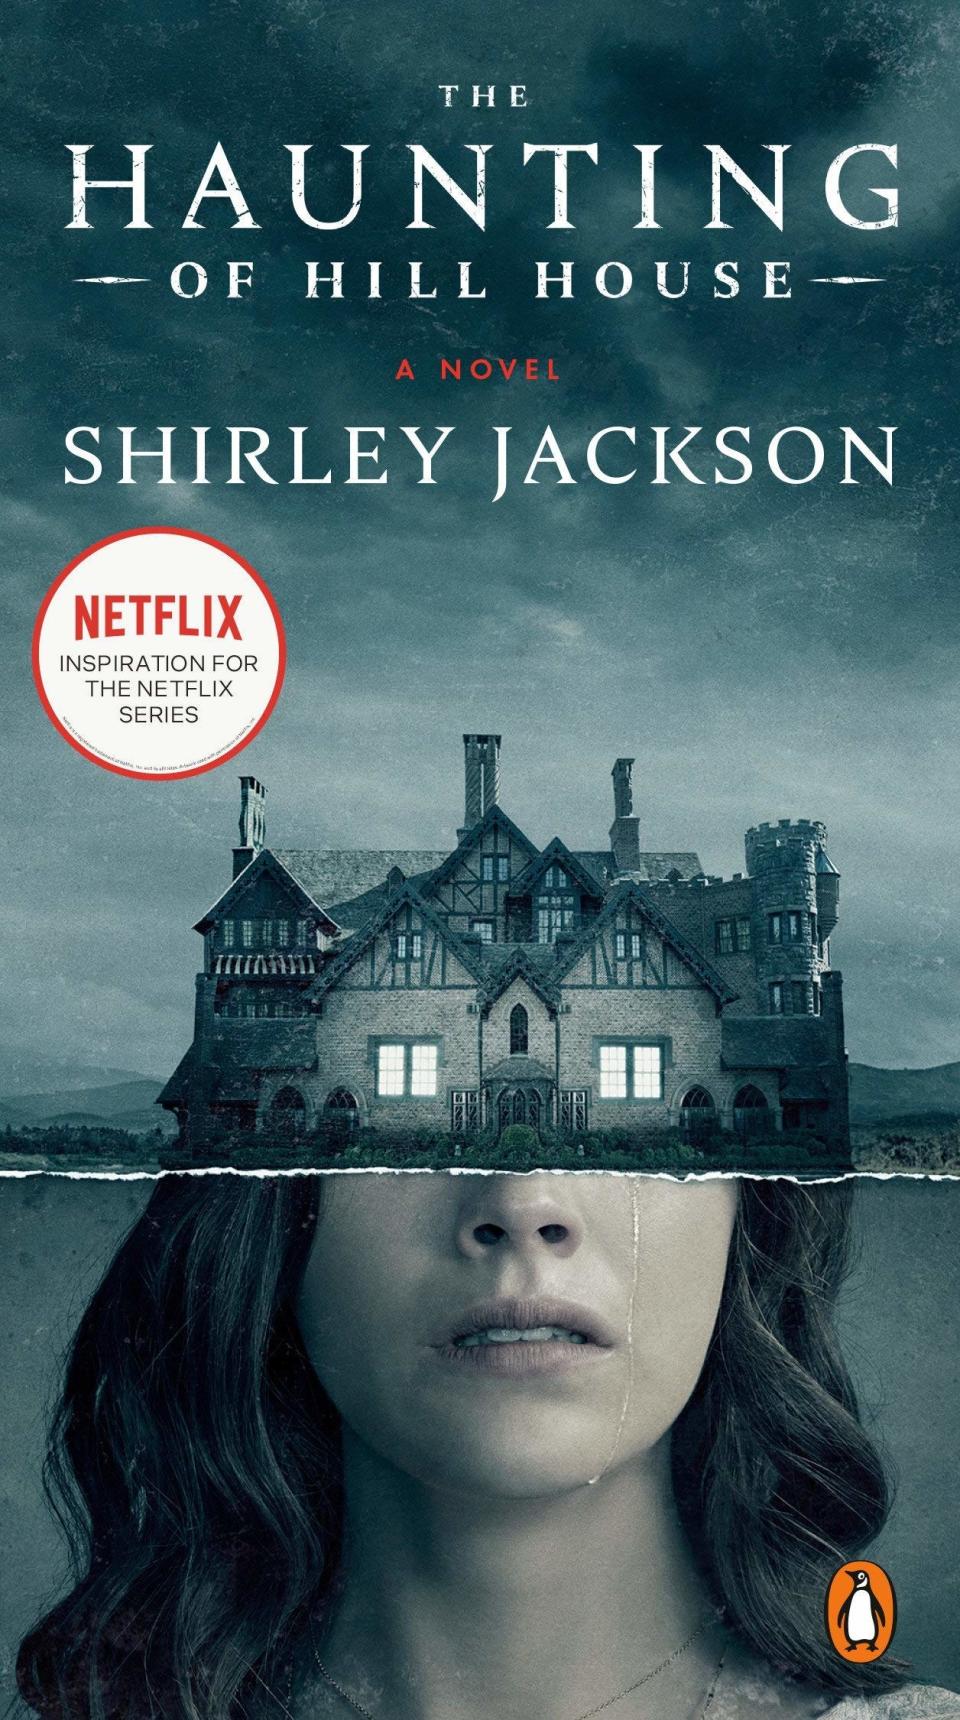 "The Haunting of Hill House" by Shirley Jackson